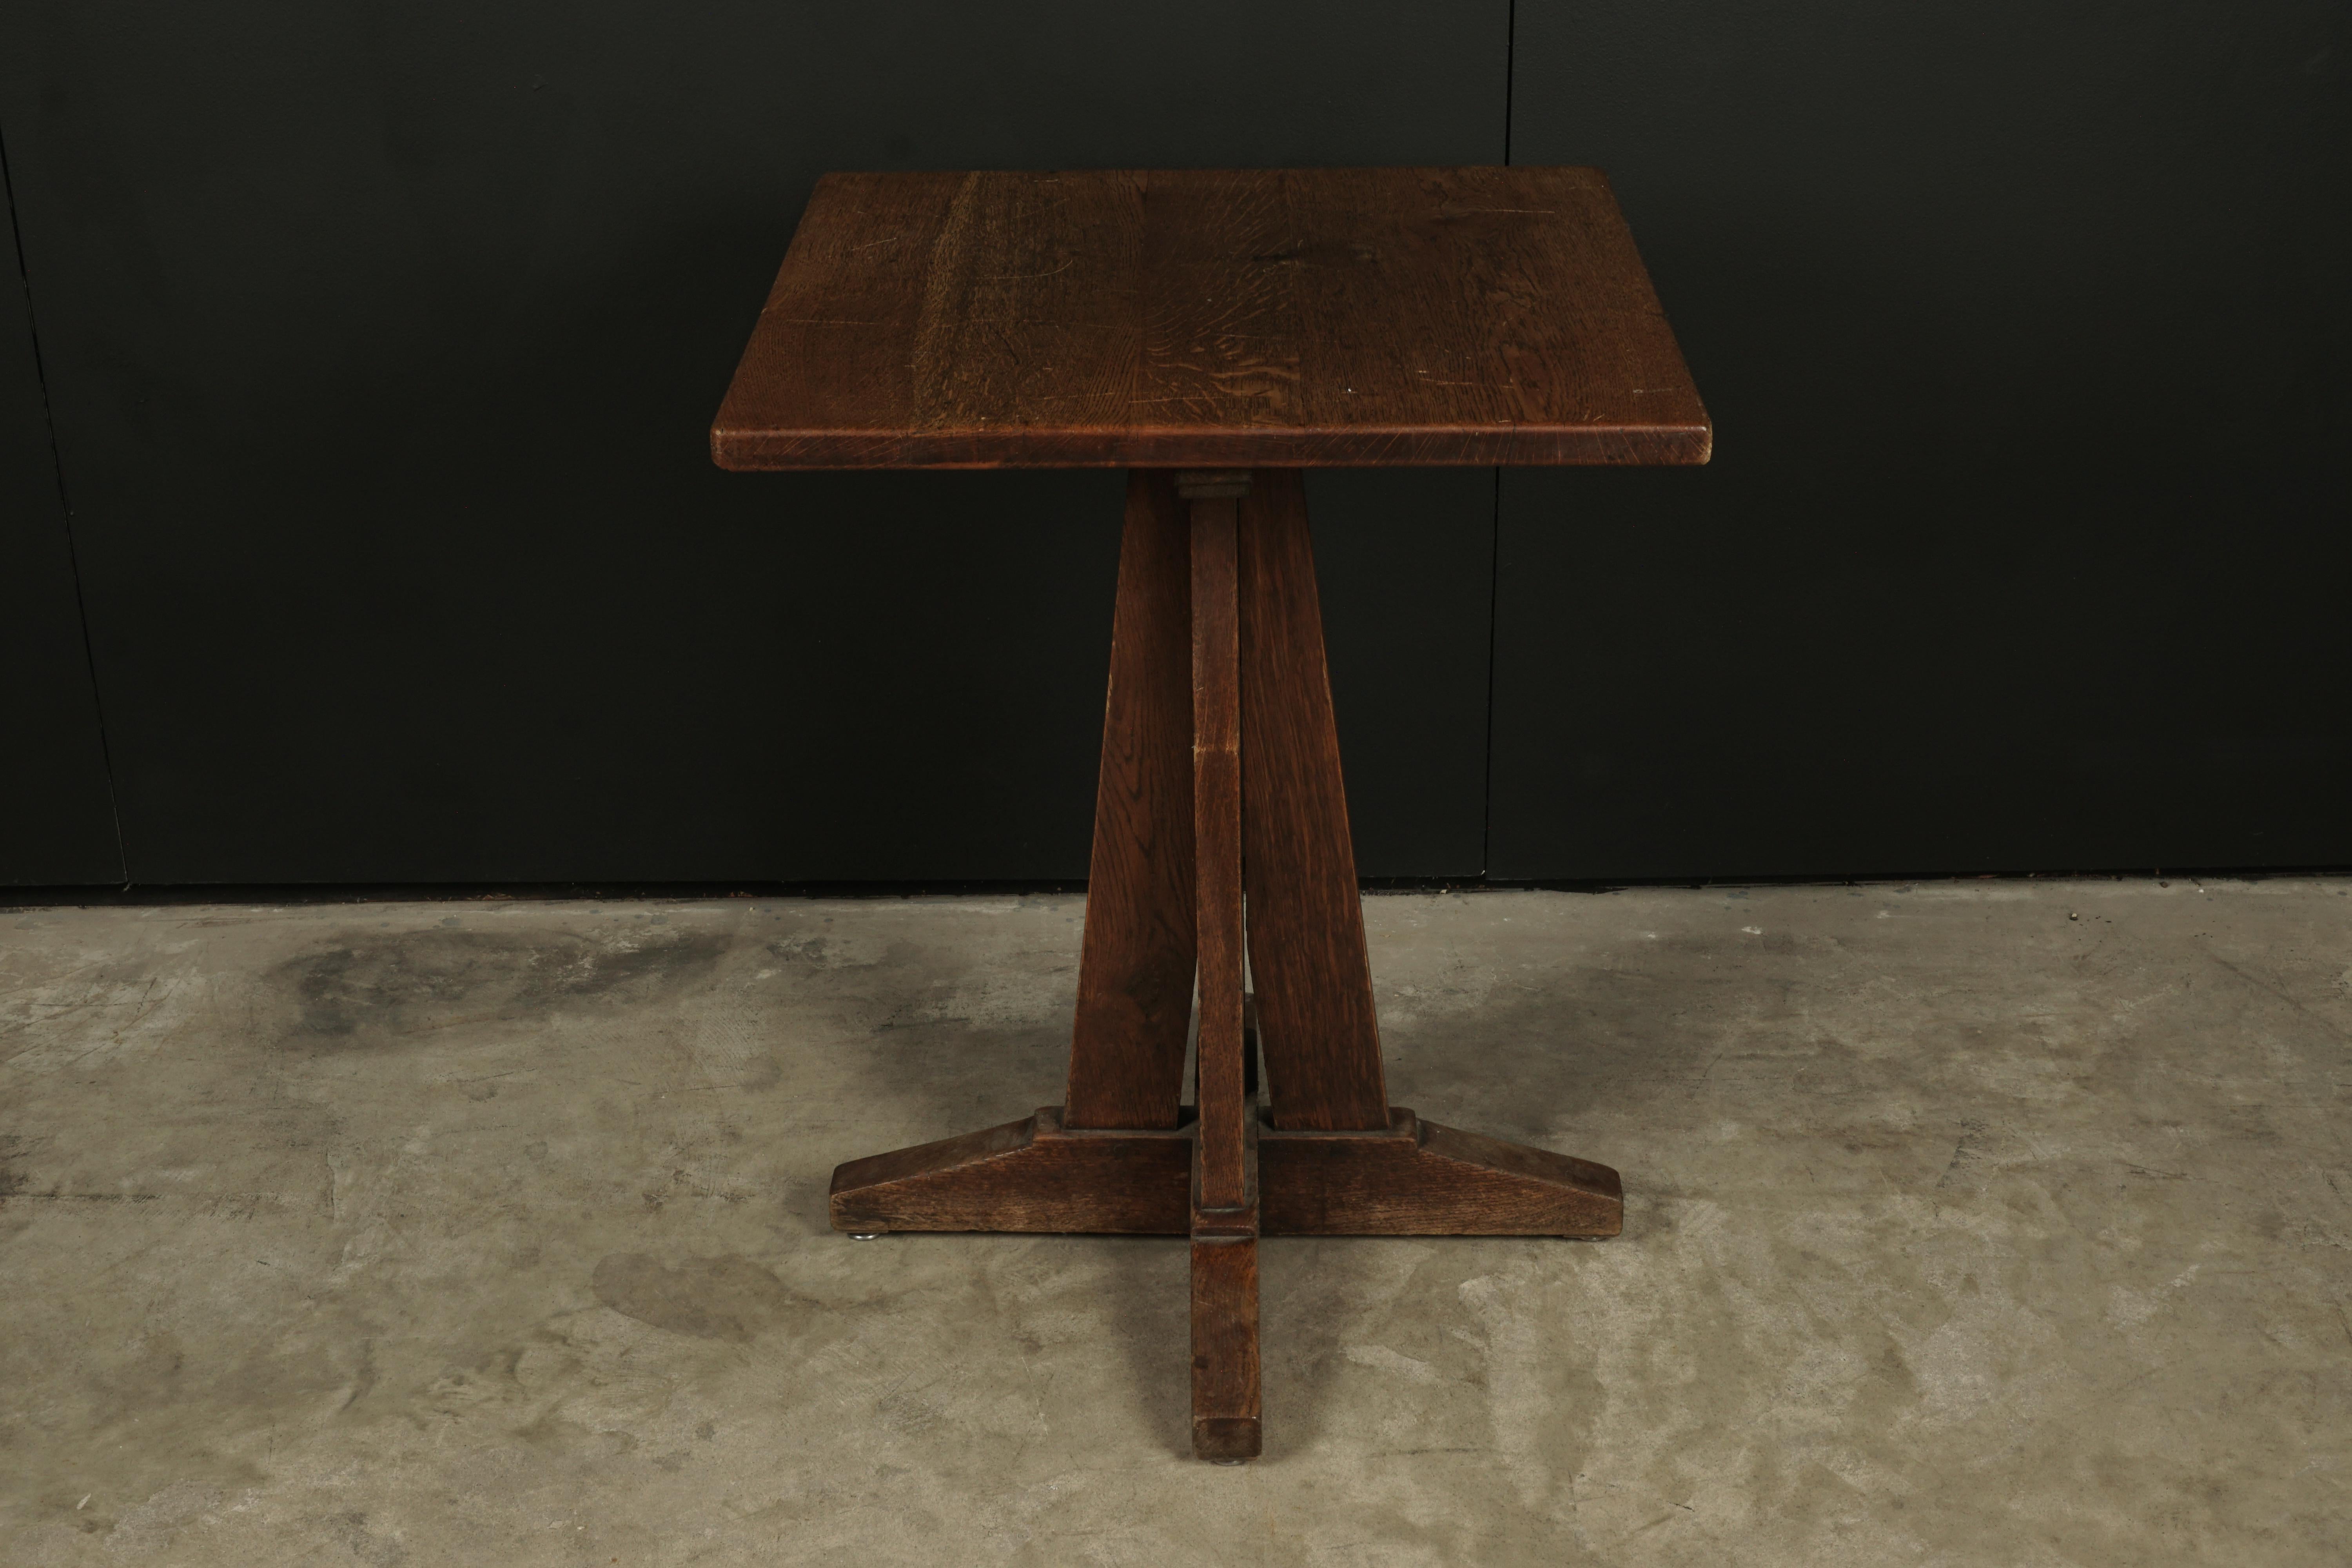 Vintage Arts & Crafts style Bistro table from France, 1960s. Solid oak construction with nice wear and patina. Unusual model.